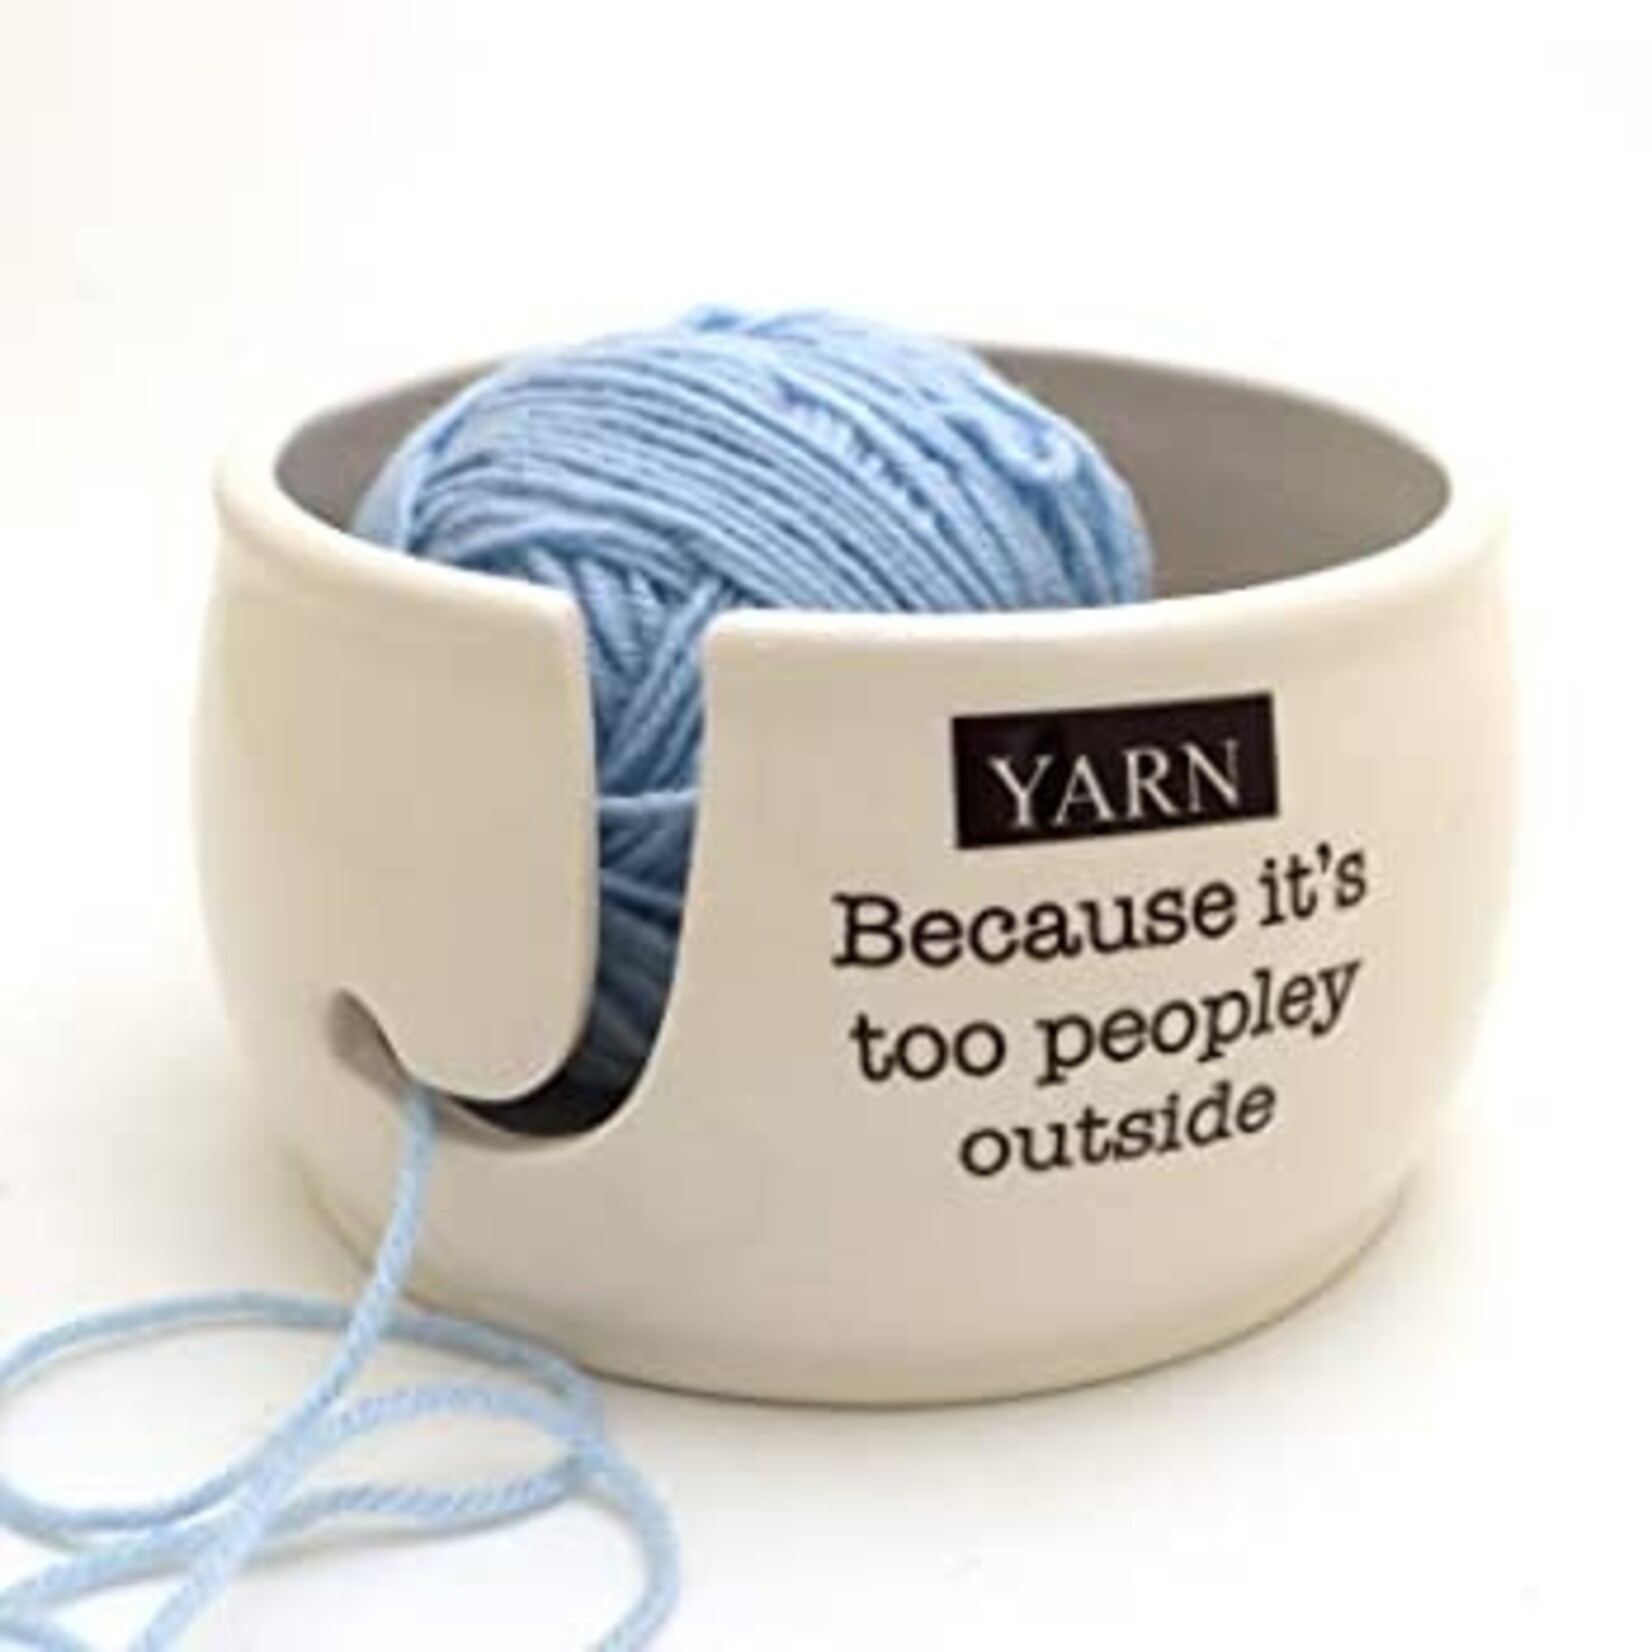 Yarn Because It's Too Peopley Outside